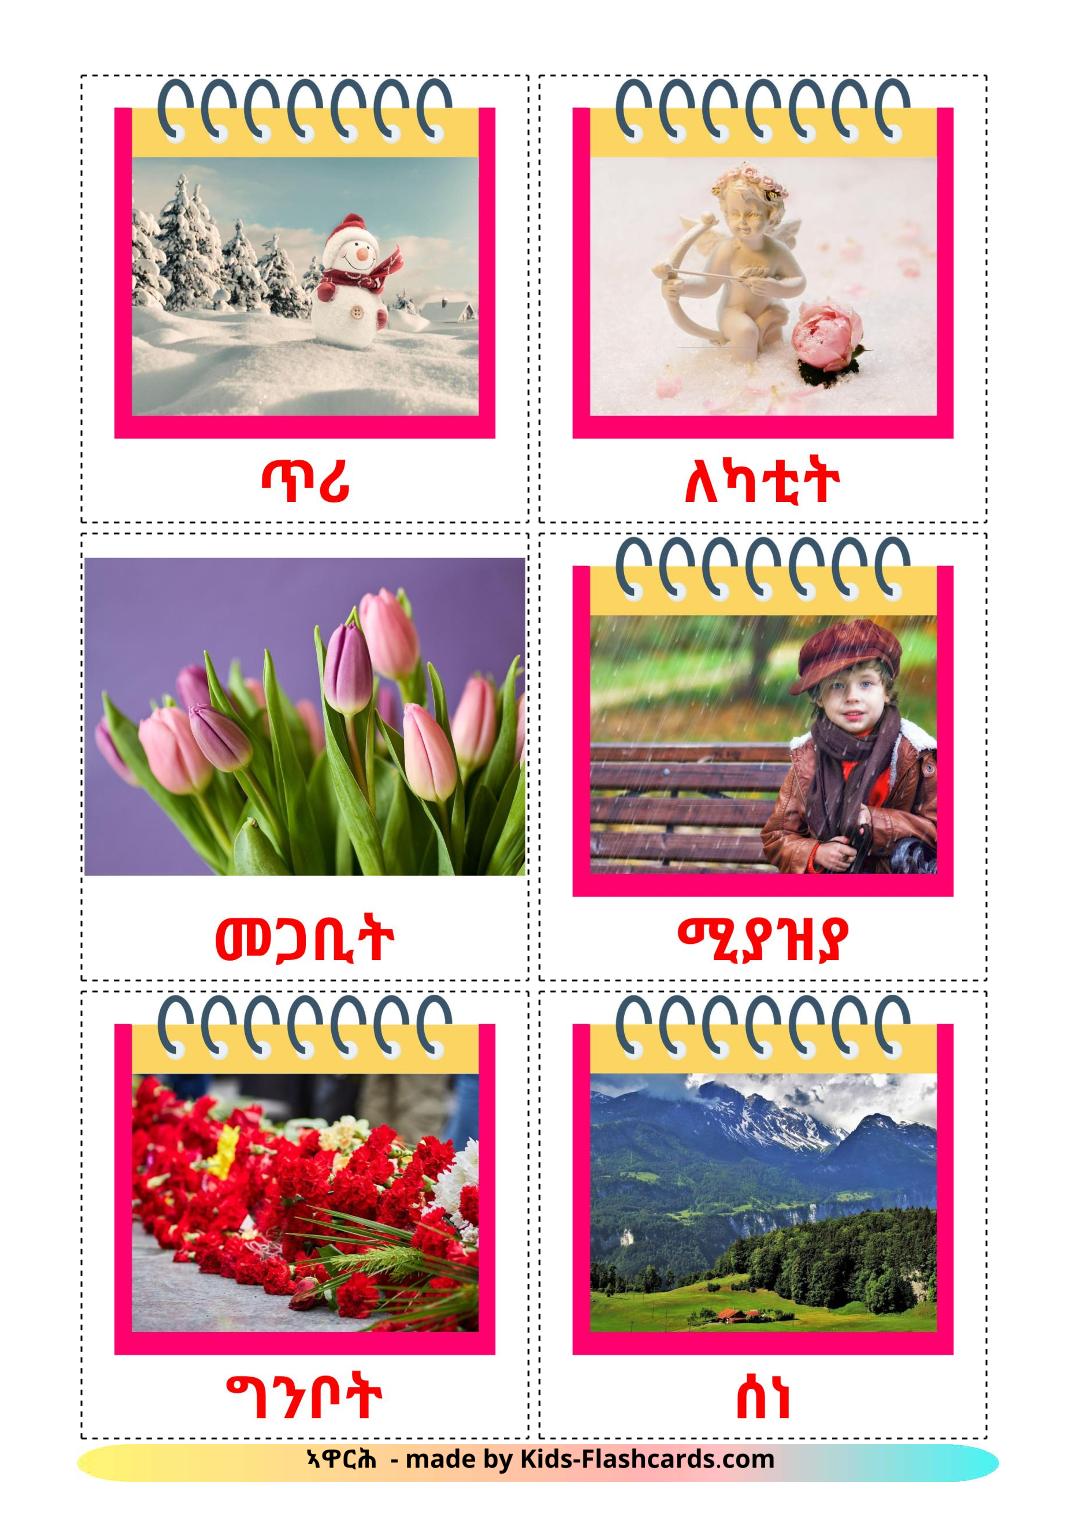 Months of the Year - 12 Free Printable tigrigna Flashcards 